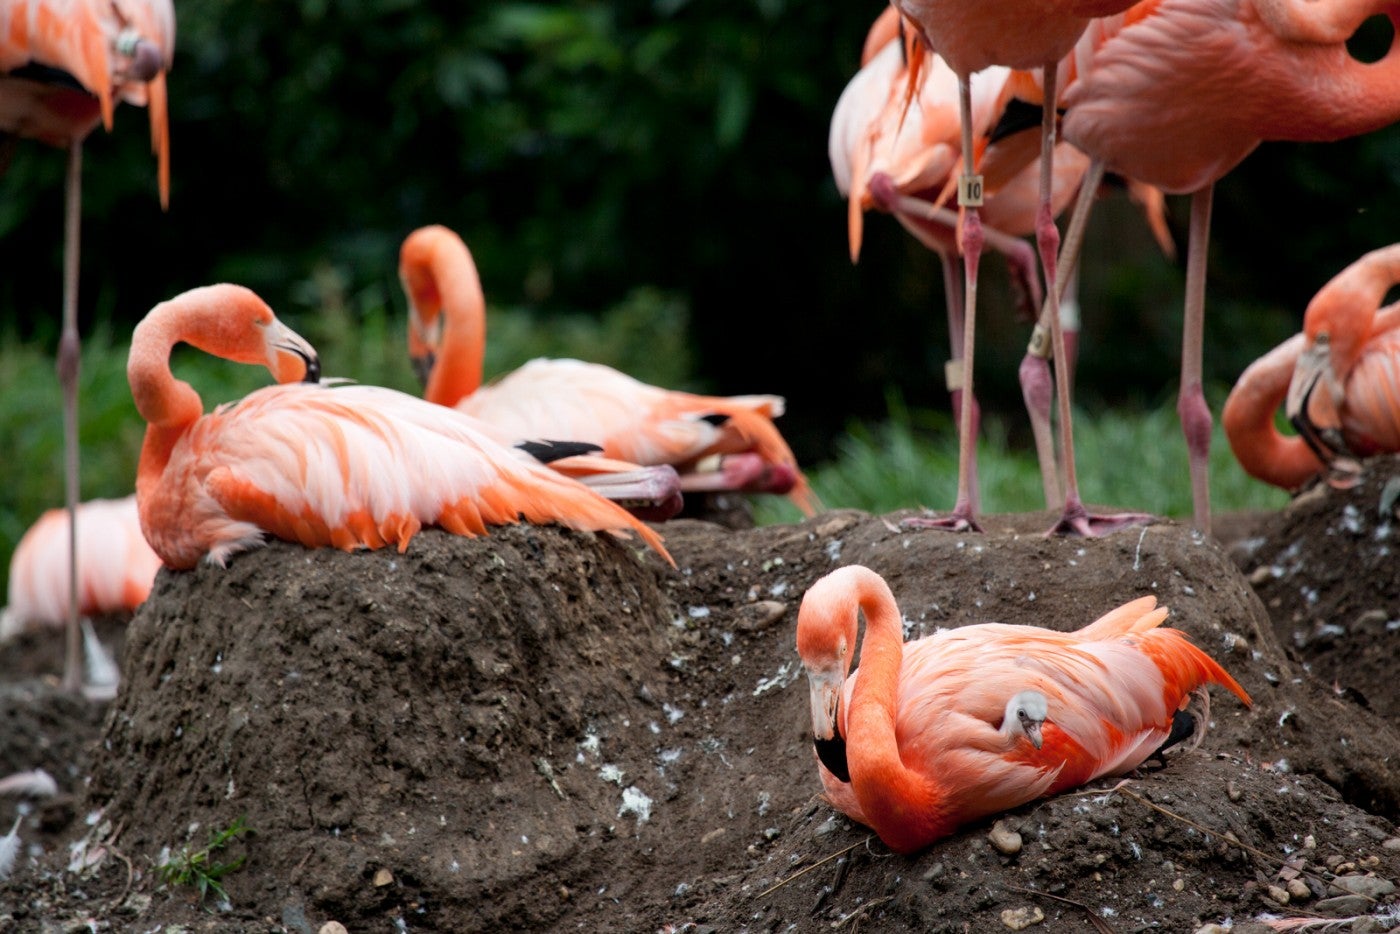 A flock of flamingos on nests made of mud that resemble mini volcanos. One flamingo in the foreground has a chick under its wings, others stand in the background.